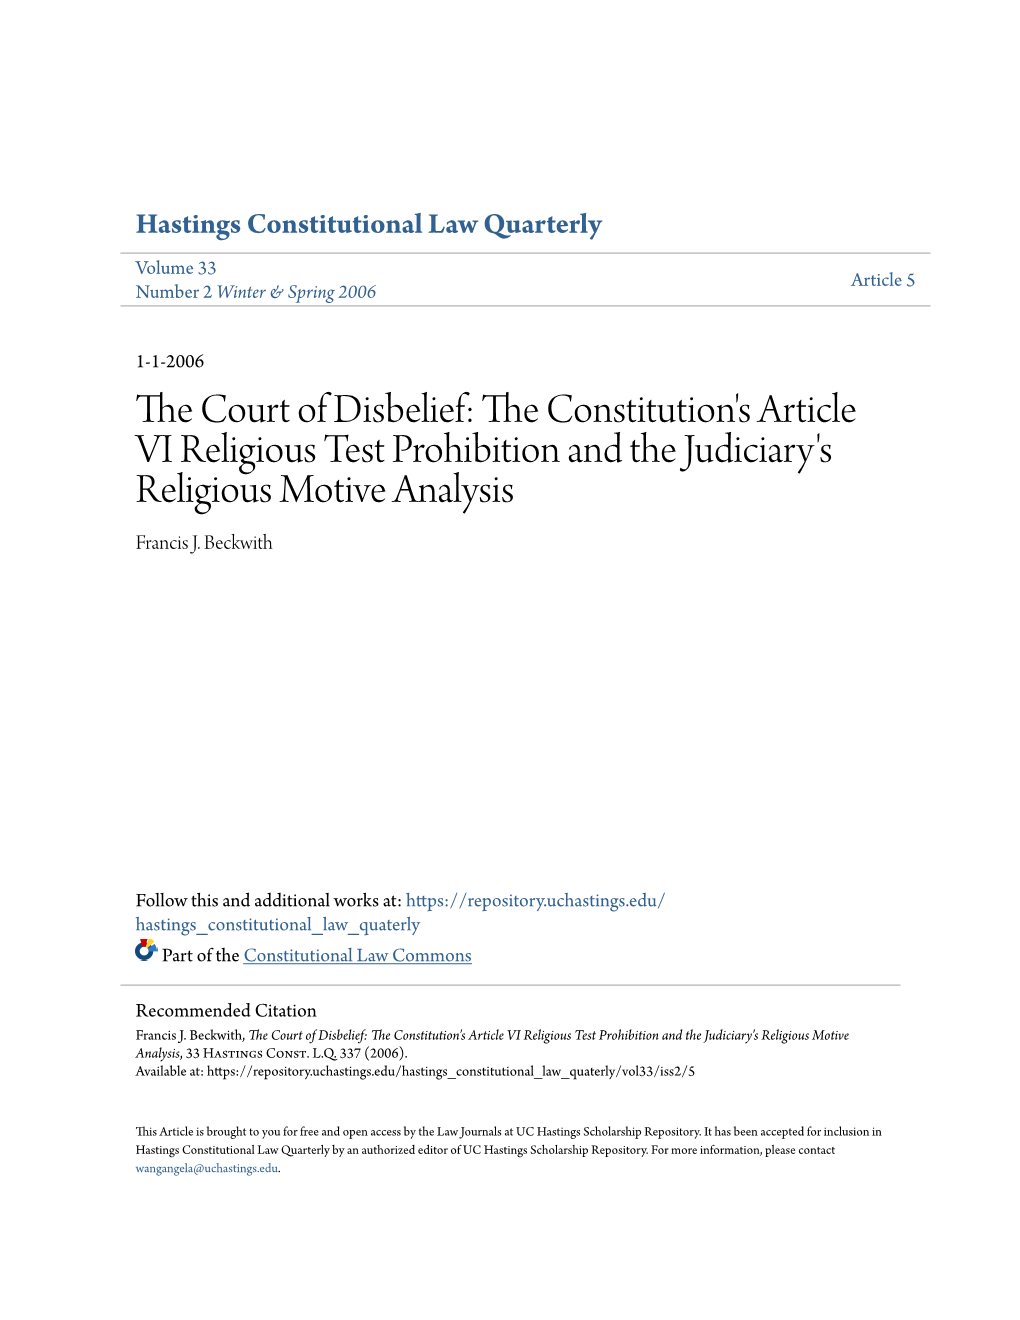 The Constitution's Article VI Religious Test Prohibition and the Judiciary's Religious Motive Analysis, 33 Hastings Const